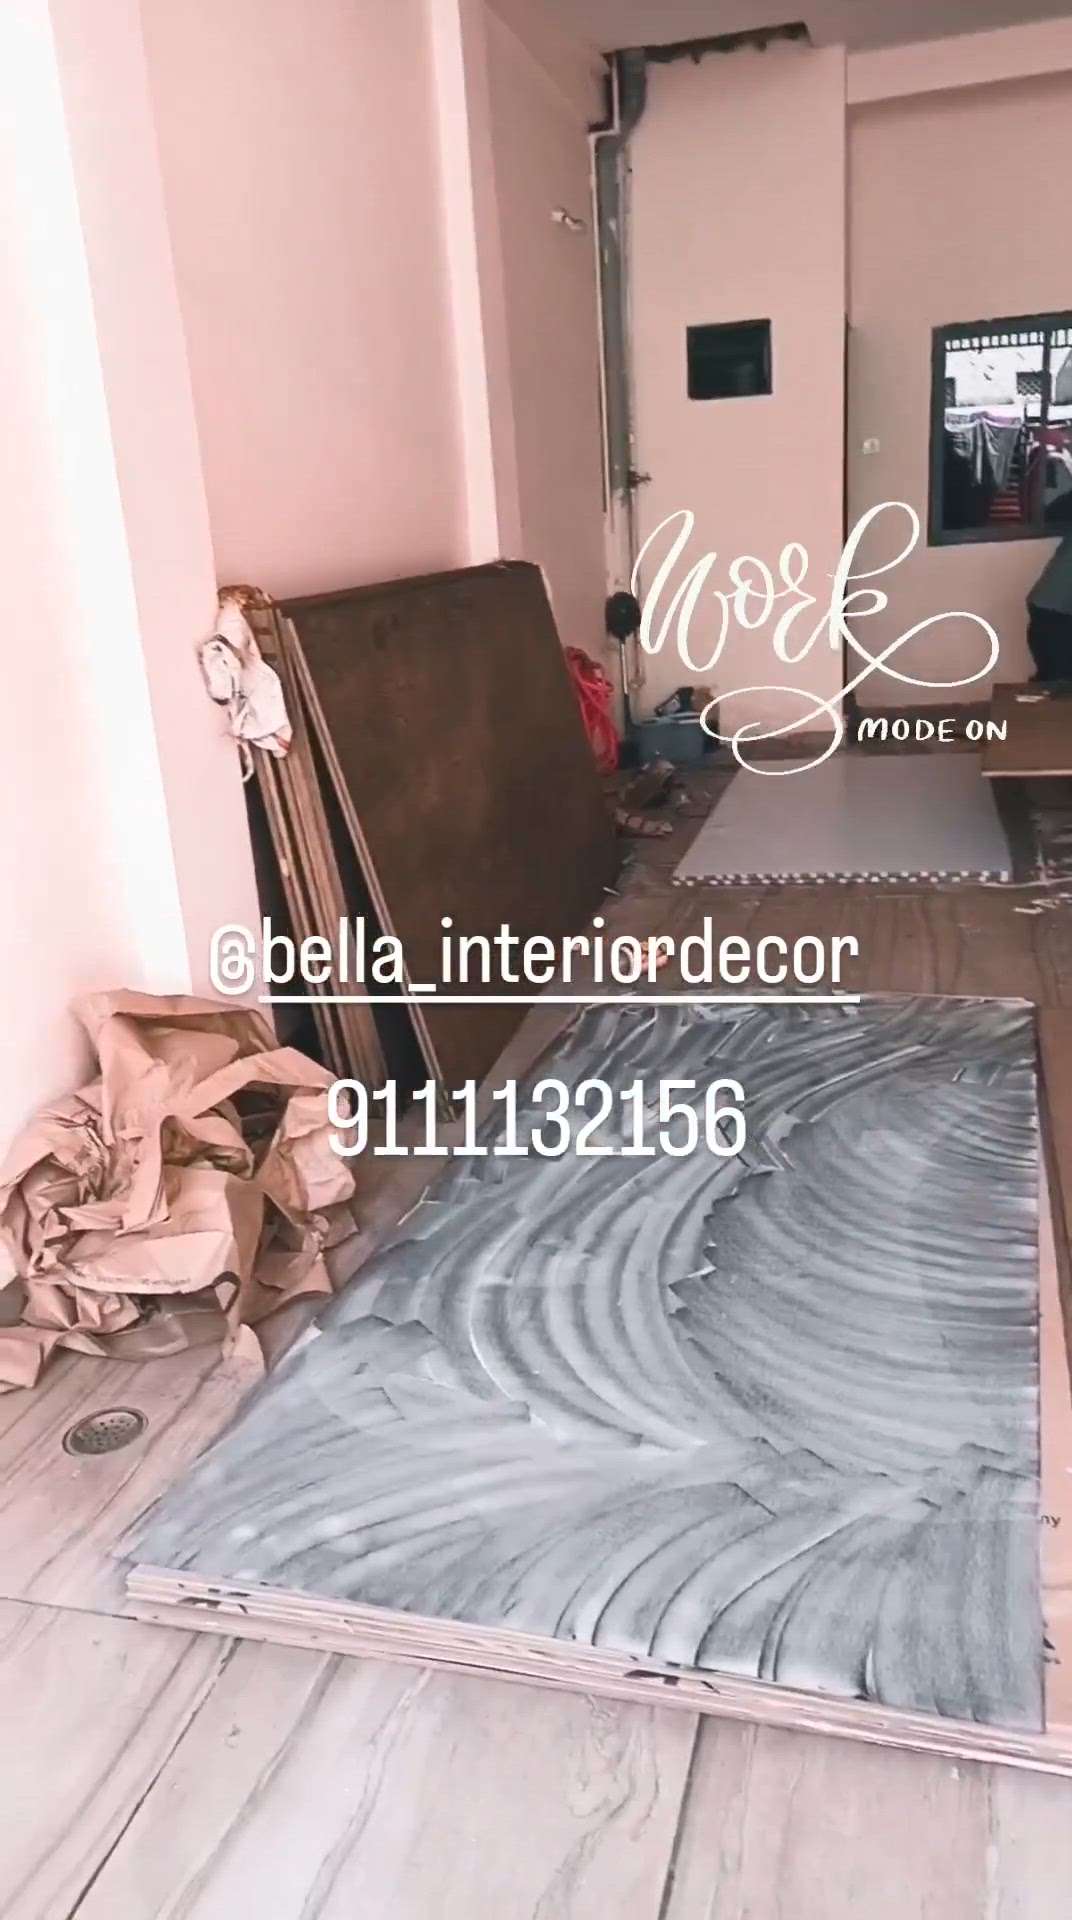 new project  😍


For house interiors contact

BELLA INTERIOR DECOR 
.
.
Make Your Dream House Come True With @bella_interiordecor 
.
.
• Your Budget ~ Their Brain 
• Themed Based Work
• BedRooms, Living Rooms, Study, Kitchen, Offices, Showrooms & More! 
.
.
Contact - 9111132156
.
Address :- jangirwala square Indore m.p. 

Credits: bella_interiordecor 

#interiordesign #design #interior #homedecor
#architecture #home #decor #interiors
#homedesign #interiordesigner #furniture
 #designer #interiorstyling
#interiordecor #homesweethome 
#furnituredesign #livingroom #interiordecorating  #instagood #instagram
#kitchendesign #foryou #photographylover #explorepage✨ #explorepage #viralpost #trending #trends #reelsinstagram #exploremore   #kolopost   #koloapp  #koloviral  #koloindore  #InteriorDesigner  #indorehouse   #LUXURY_INTERIOR   #luxurysofa   #luxurylivingroom  #koloapp